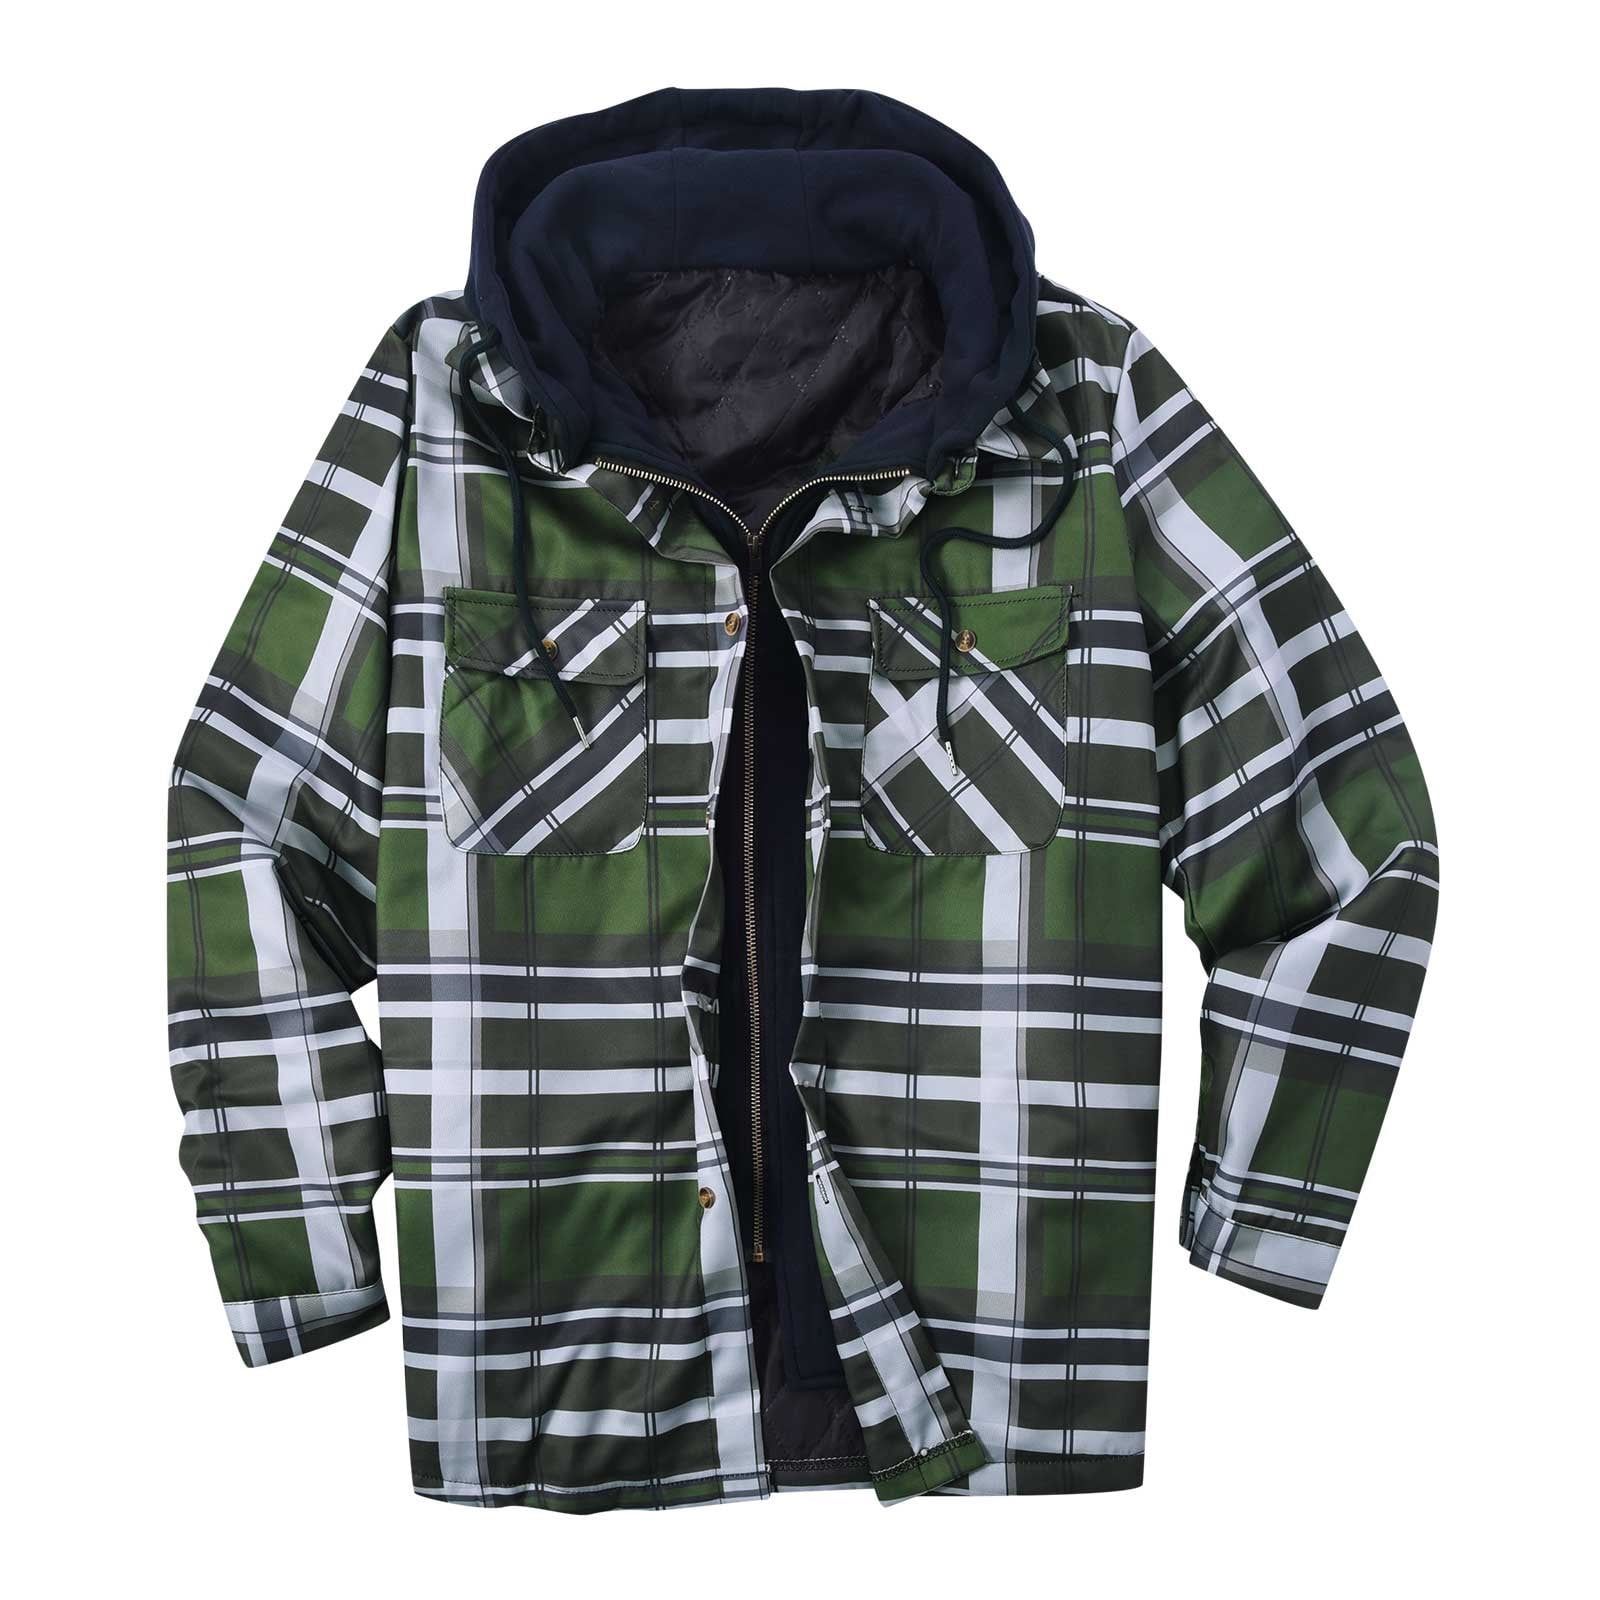 Flannel Jackets for Men Big and Tall,Men's Fashion Sherpa Quilted Lined ...